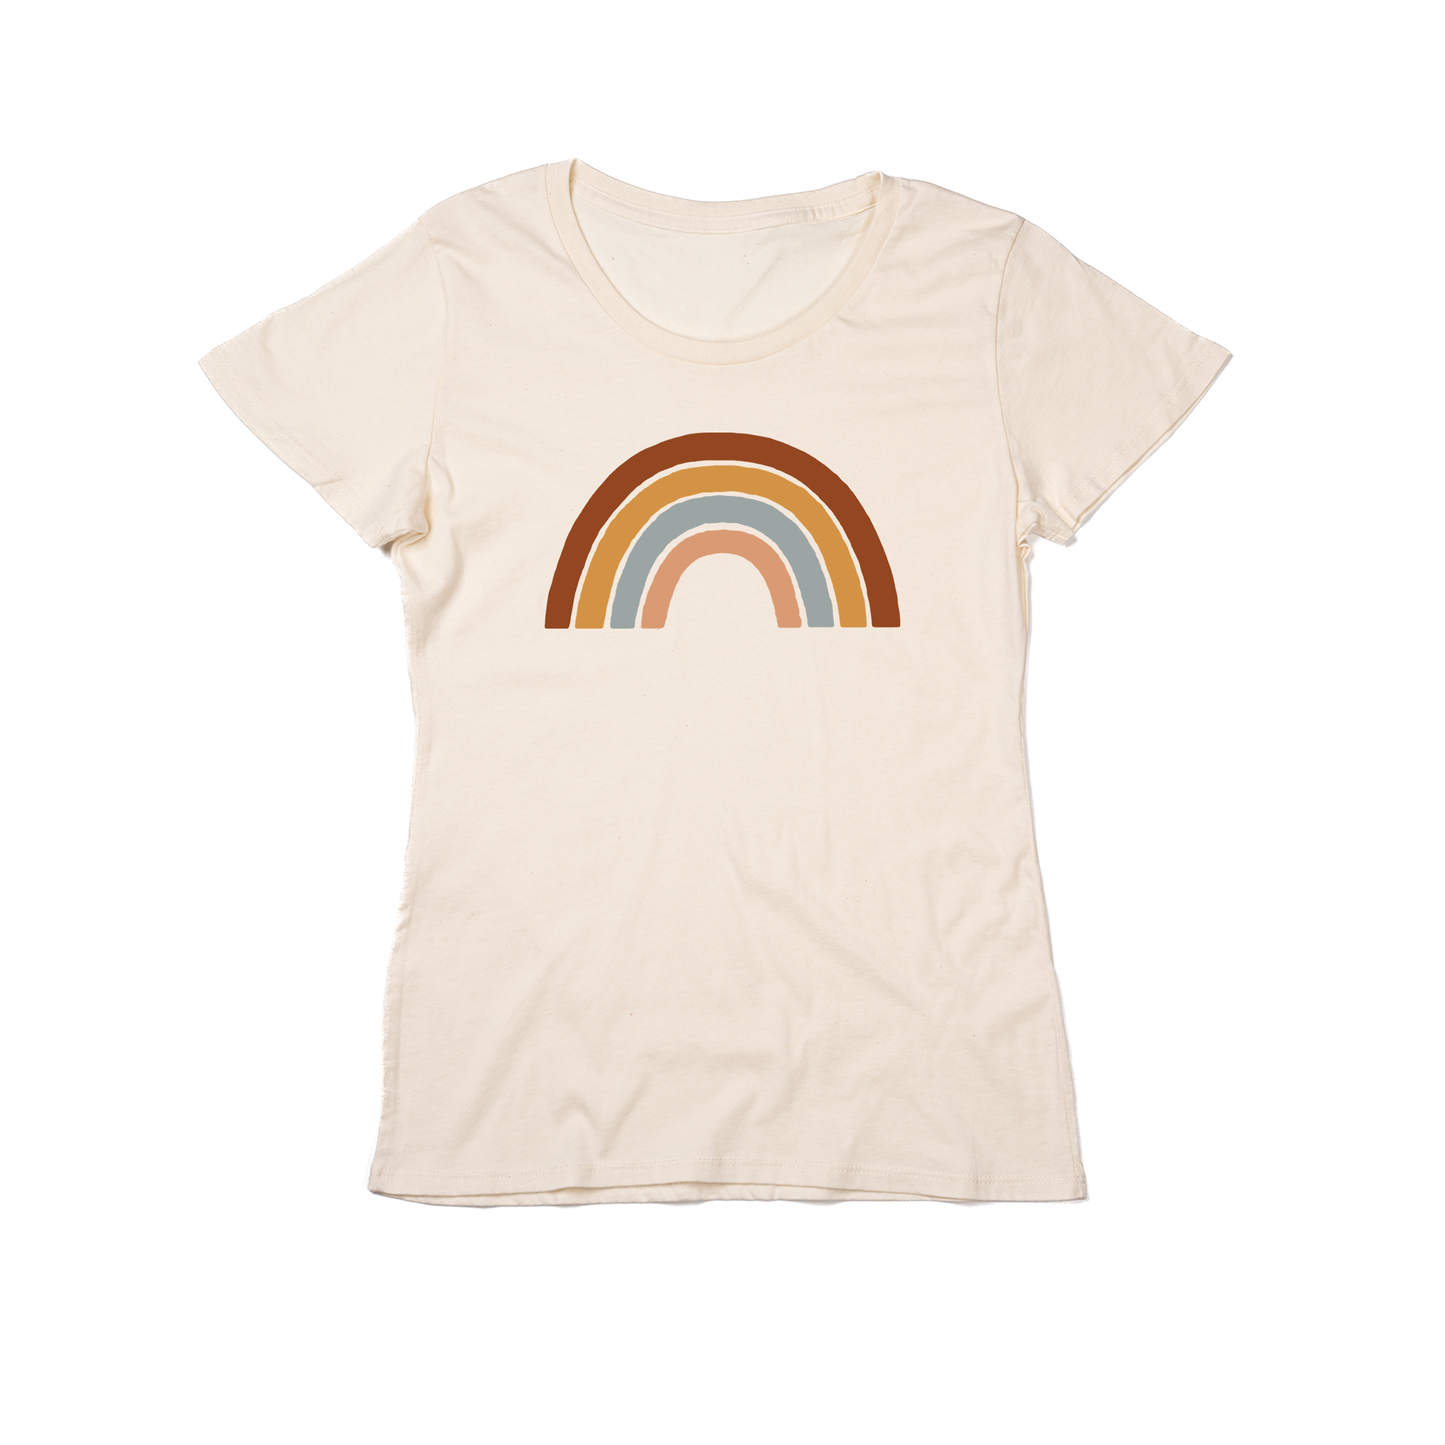 Rainbow (5 Color Options, Color Option #1) - Women's Fitted Tee (Natural)